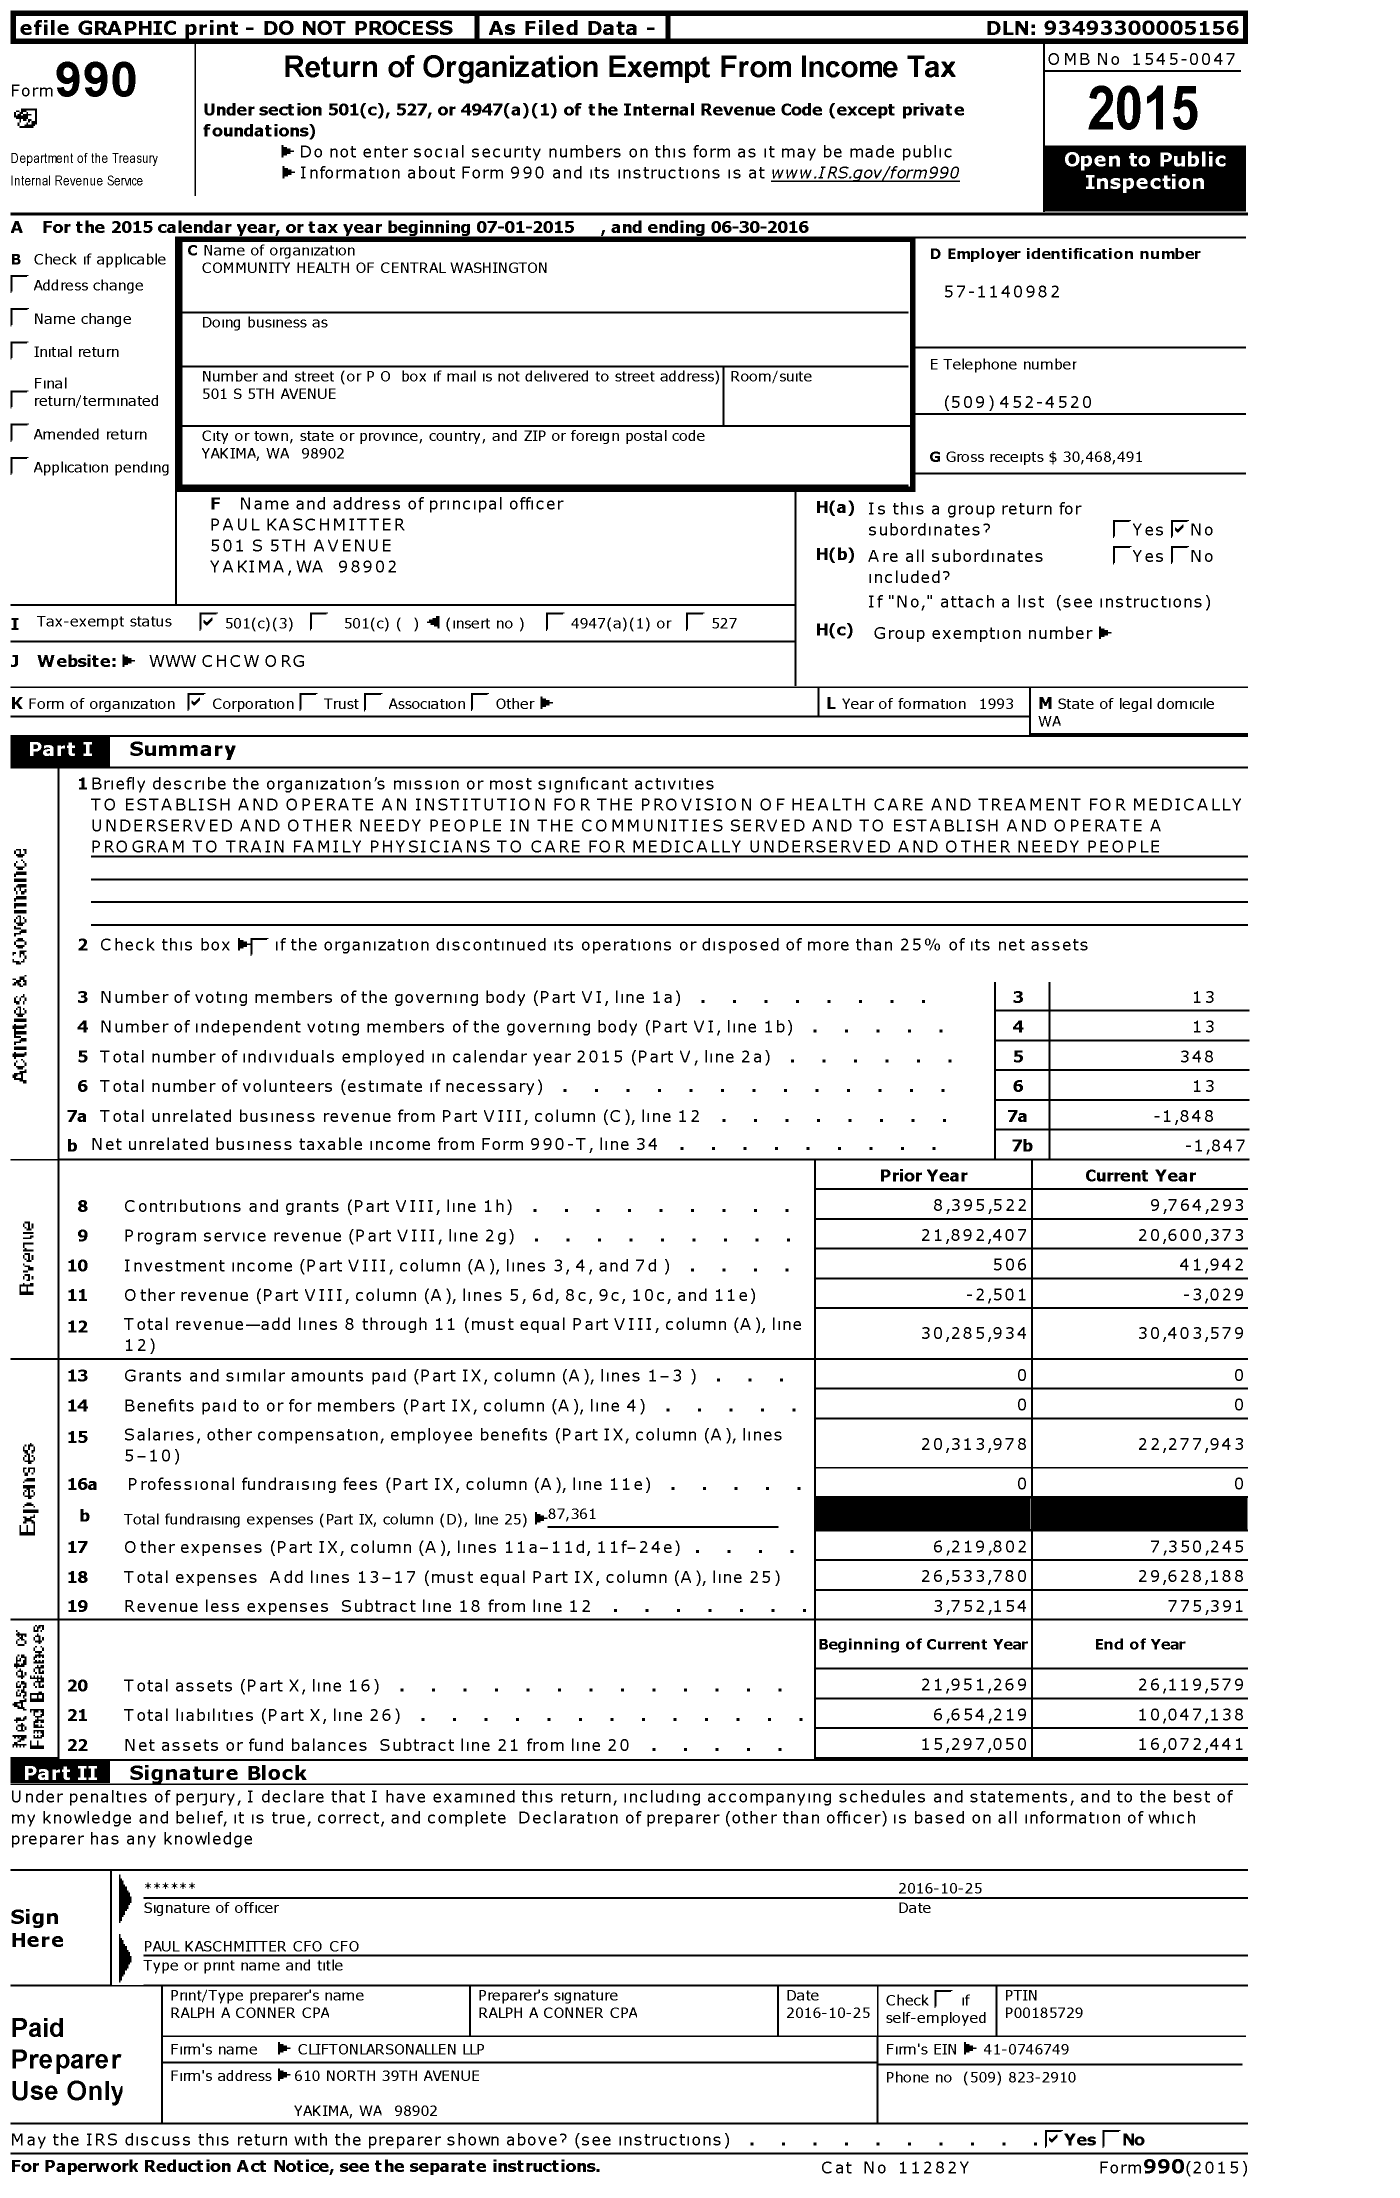 Image of first page of 2015 Form 990 for Community Health of Central Washington (CHCW)